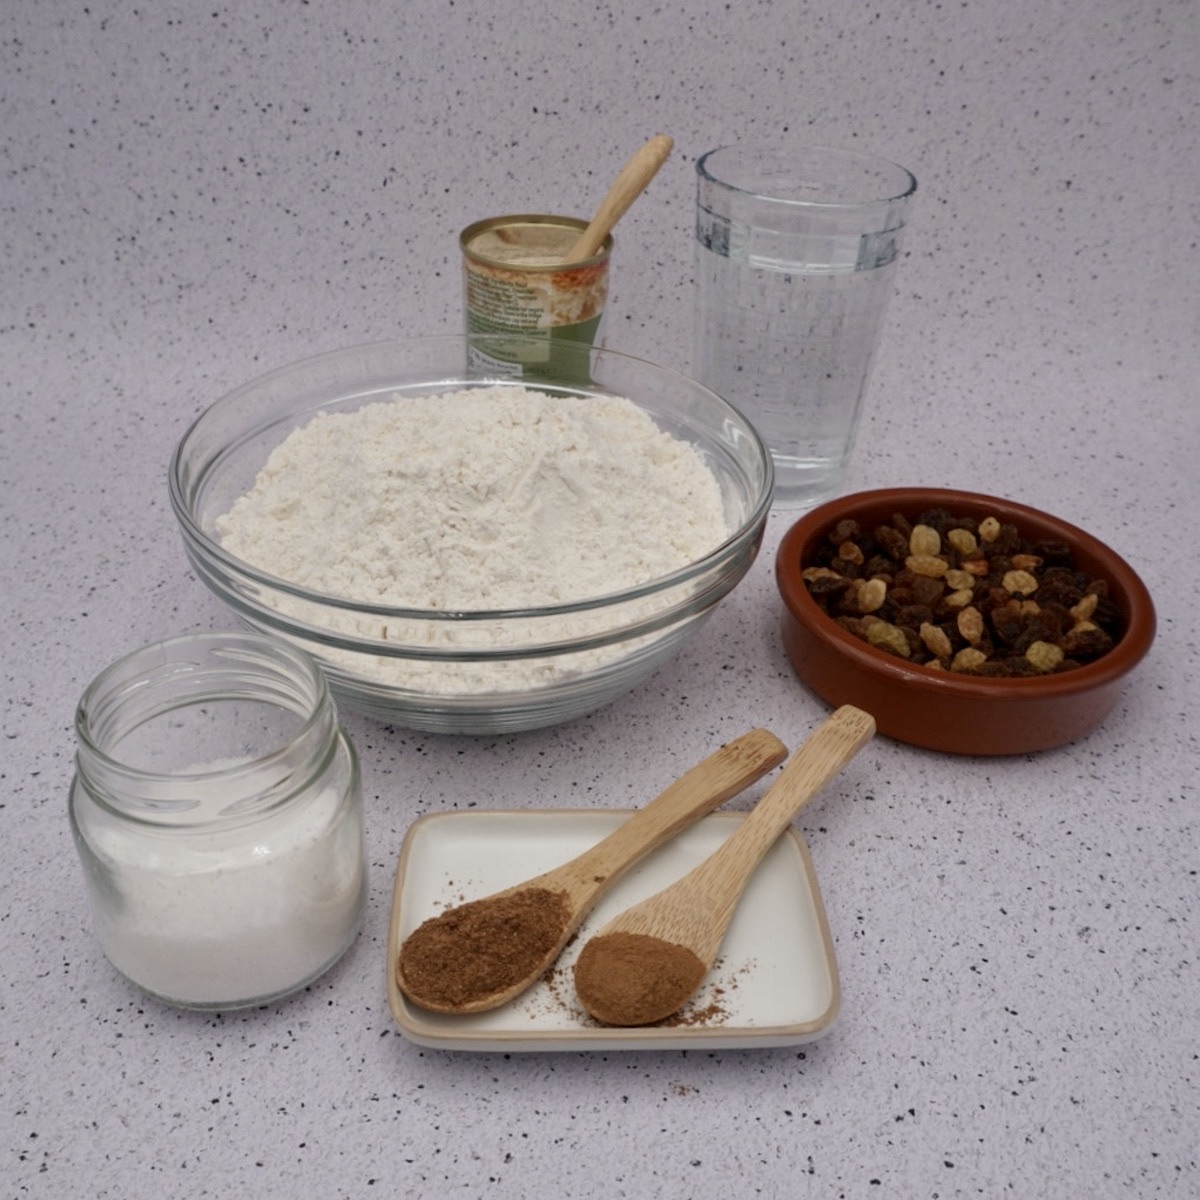 Flour, yeast, water, dried fruit, salt and spices